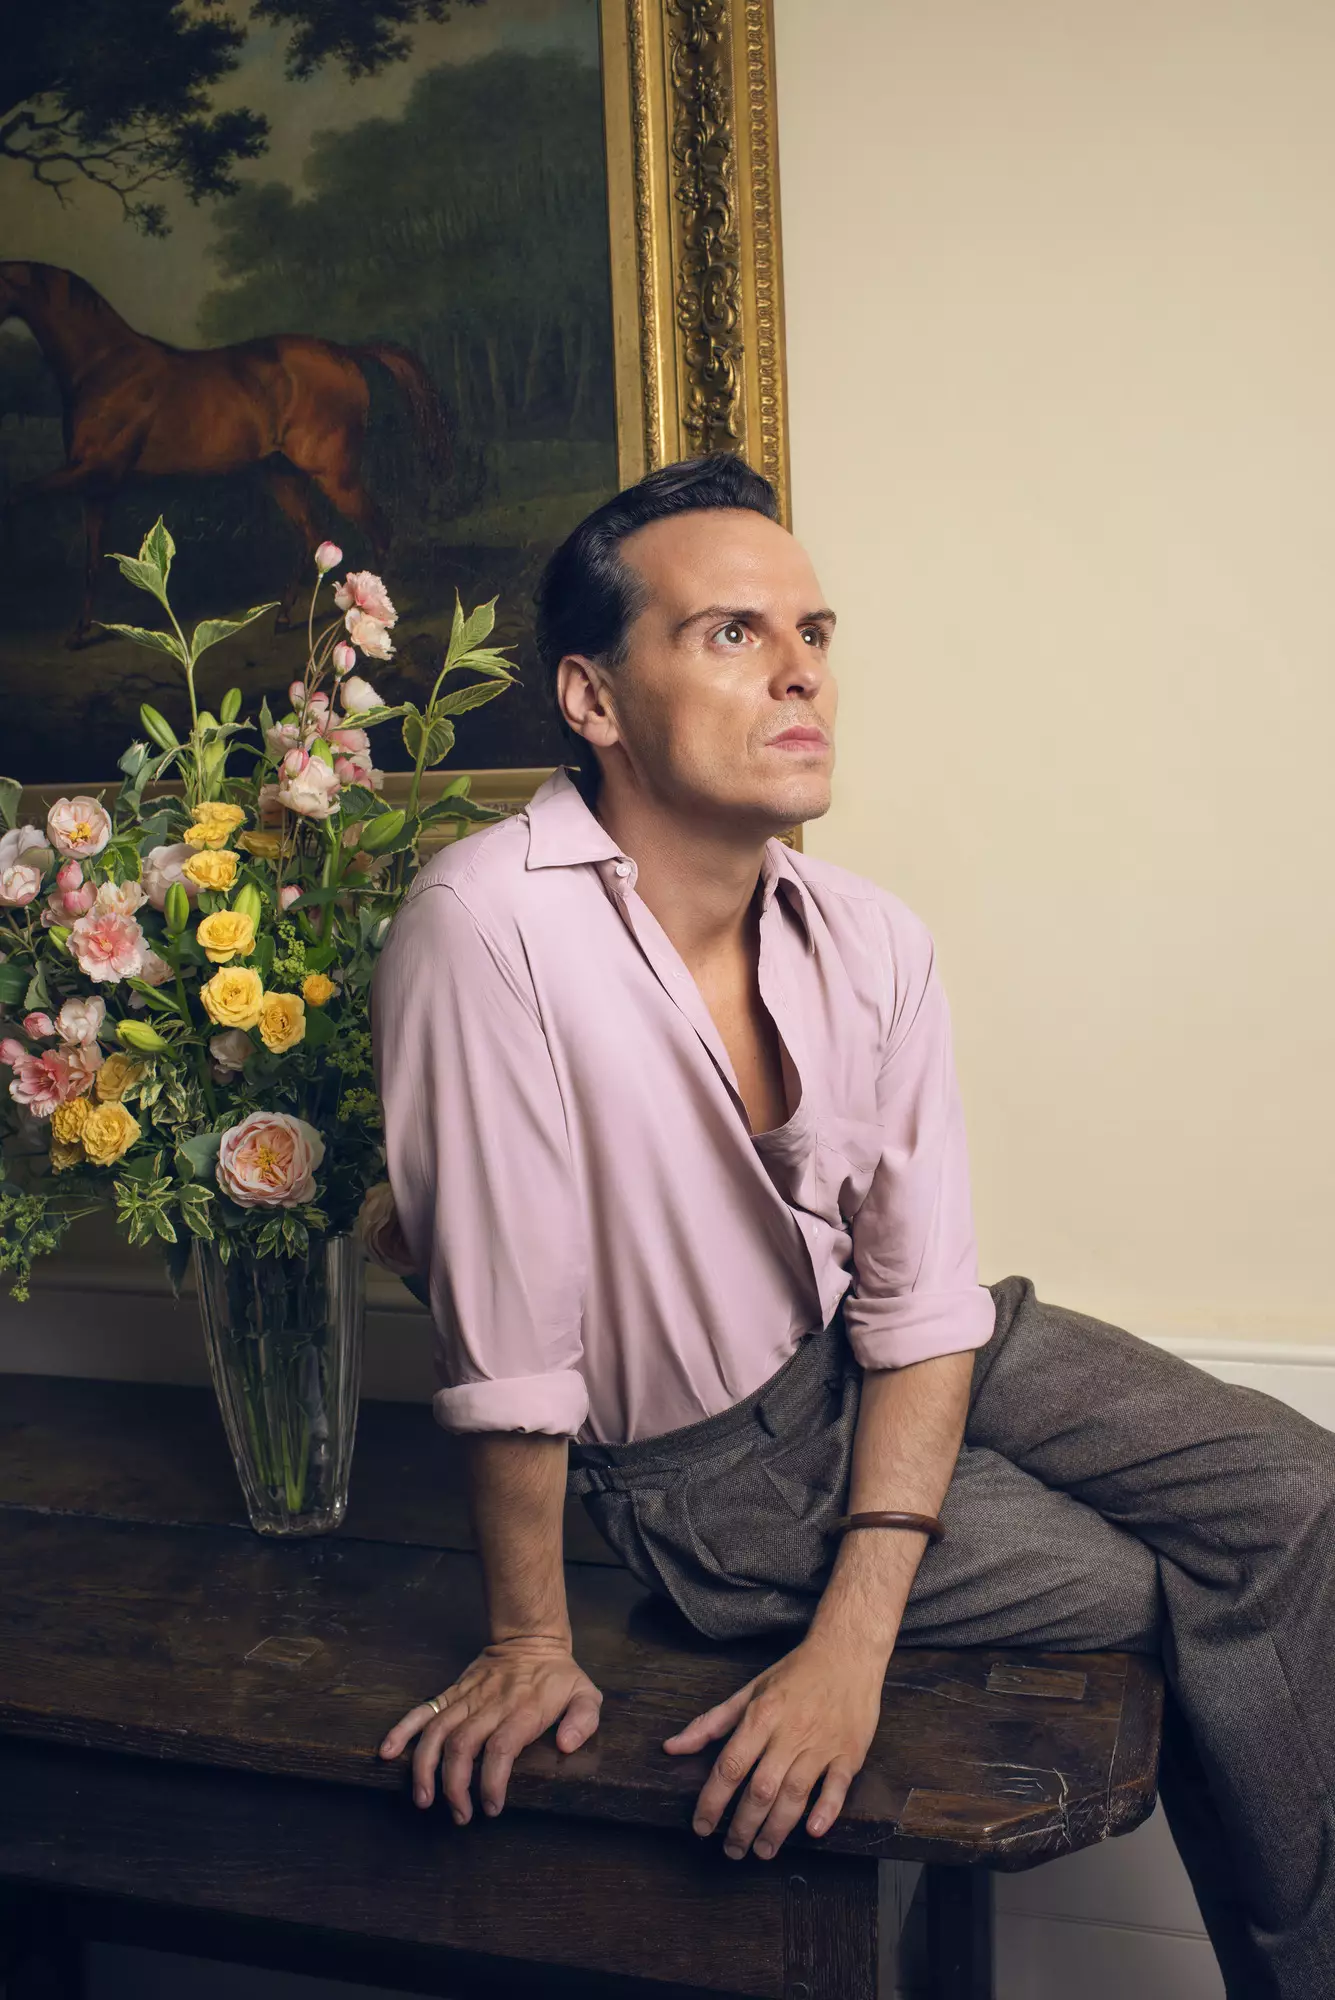 Expect more sexy scenes from Andrew Scott (